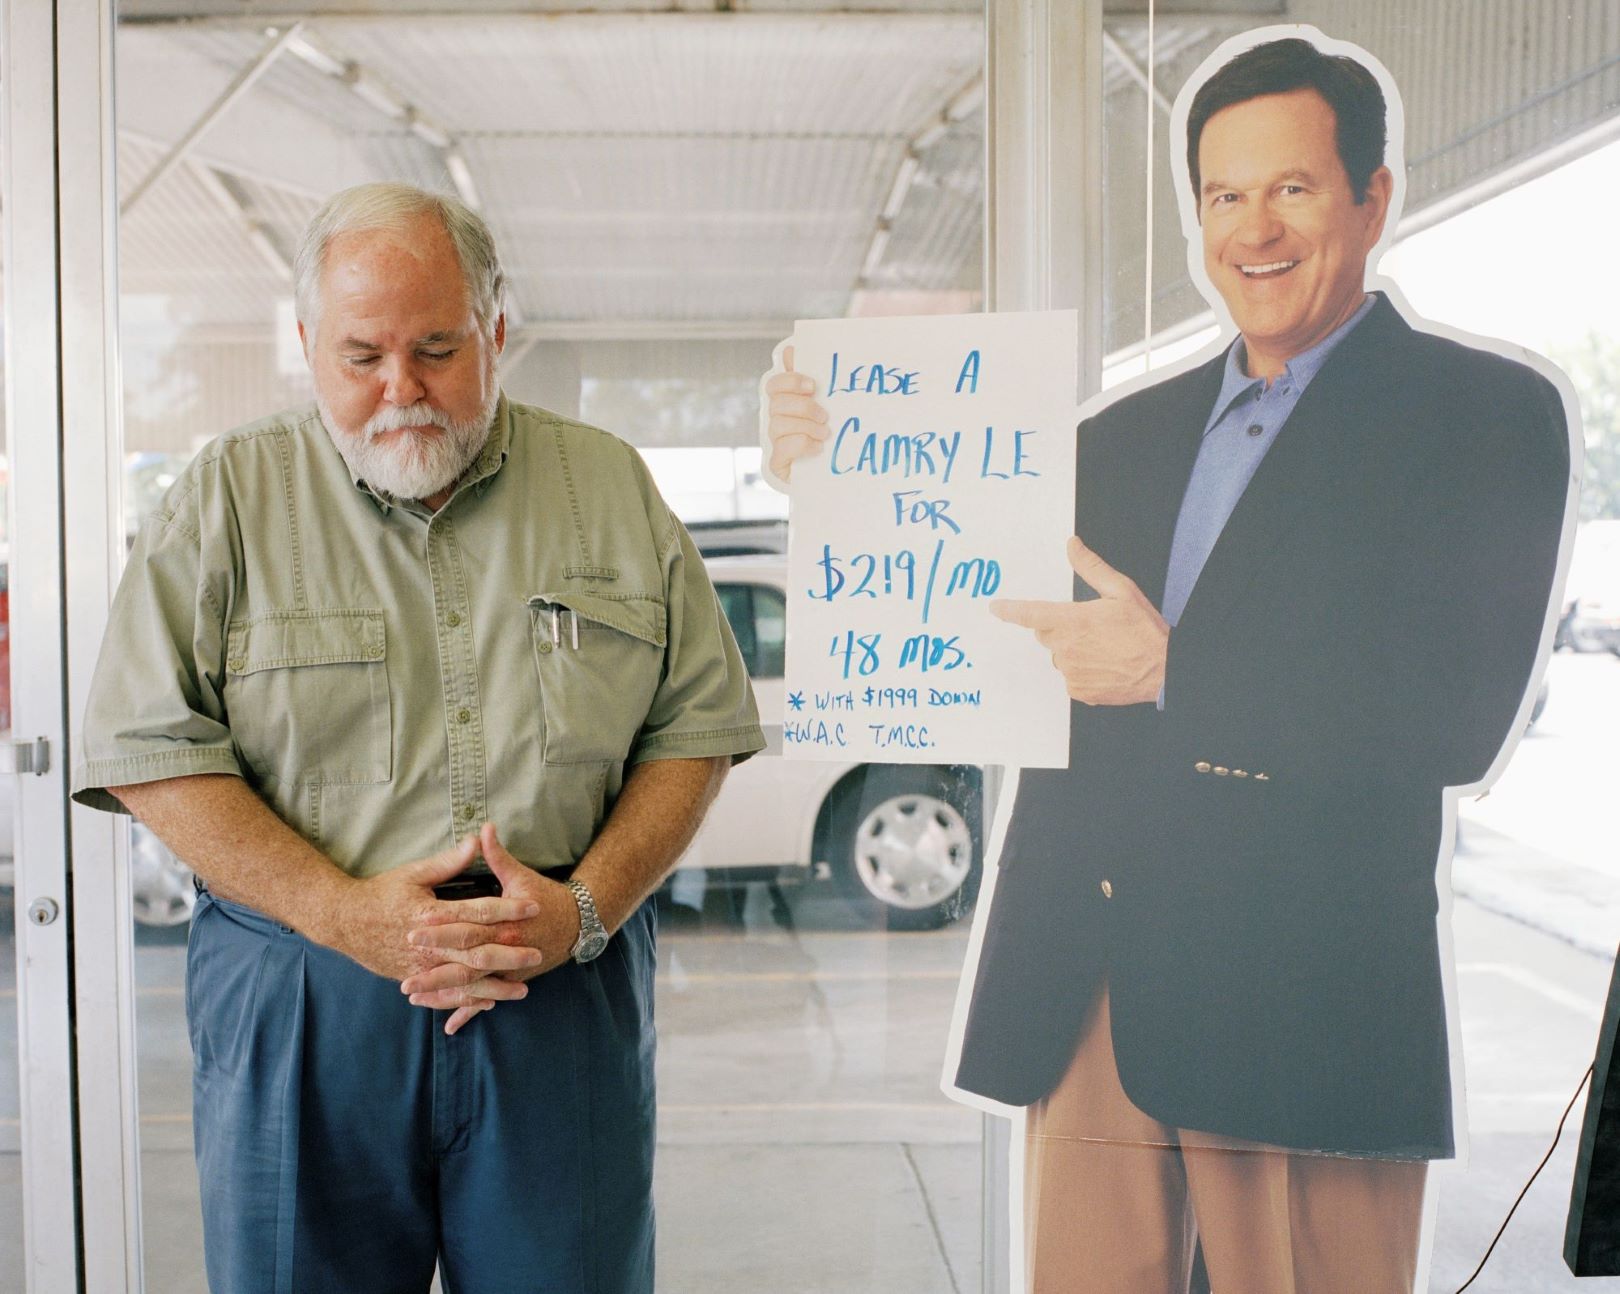 Car salesperson standing next to a cardboard cutout of another car salesperson